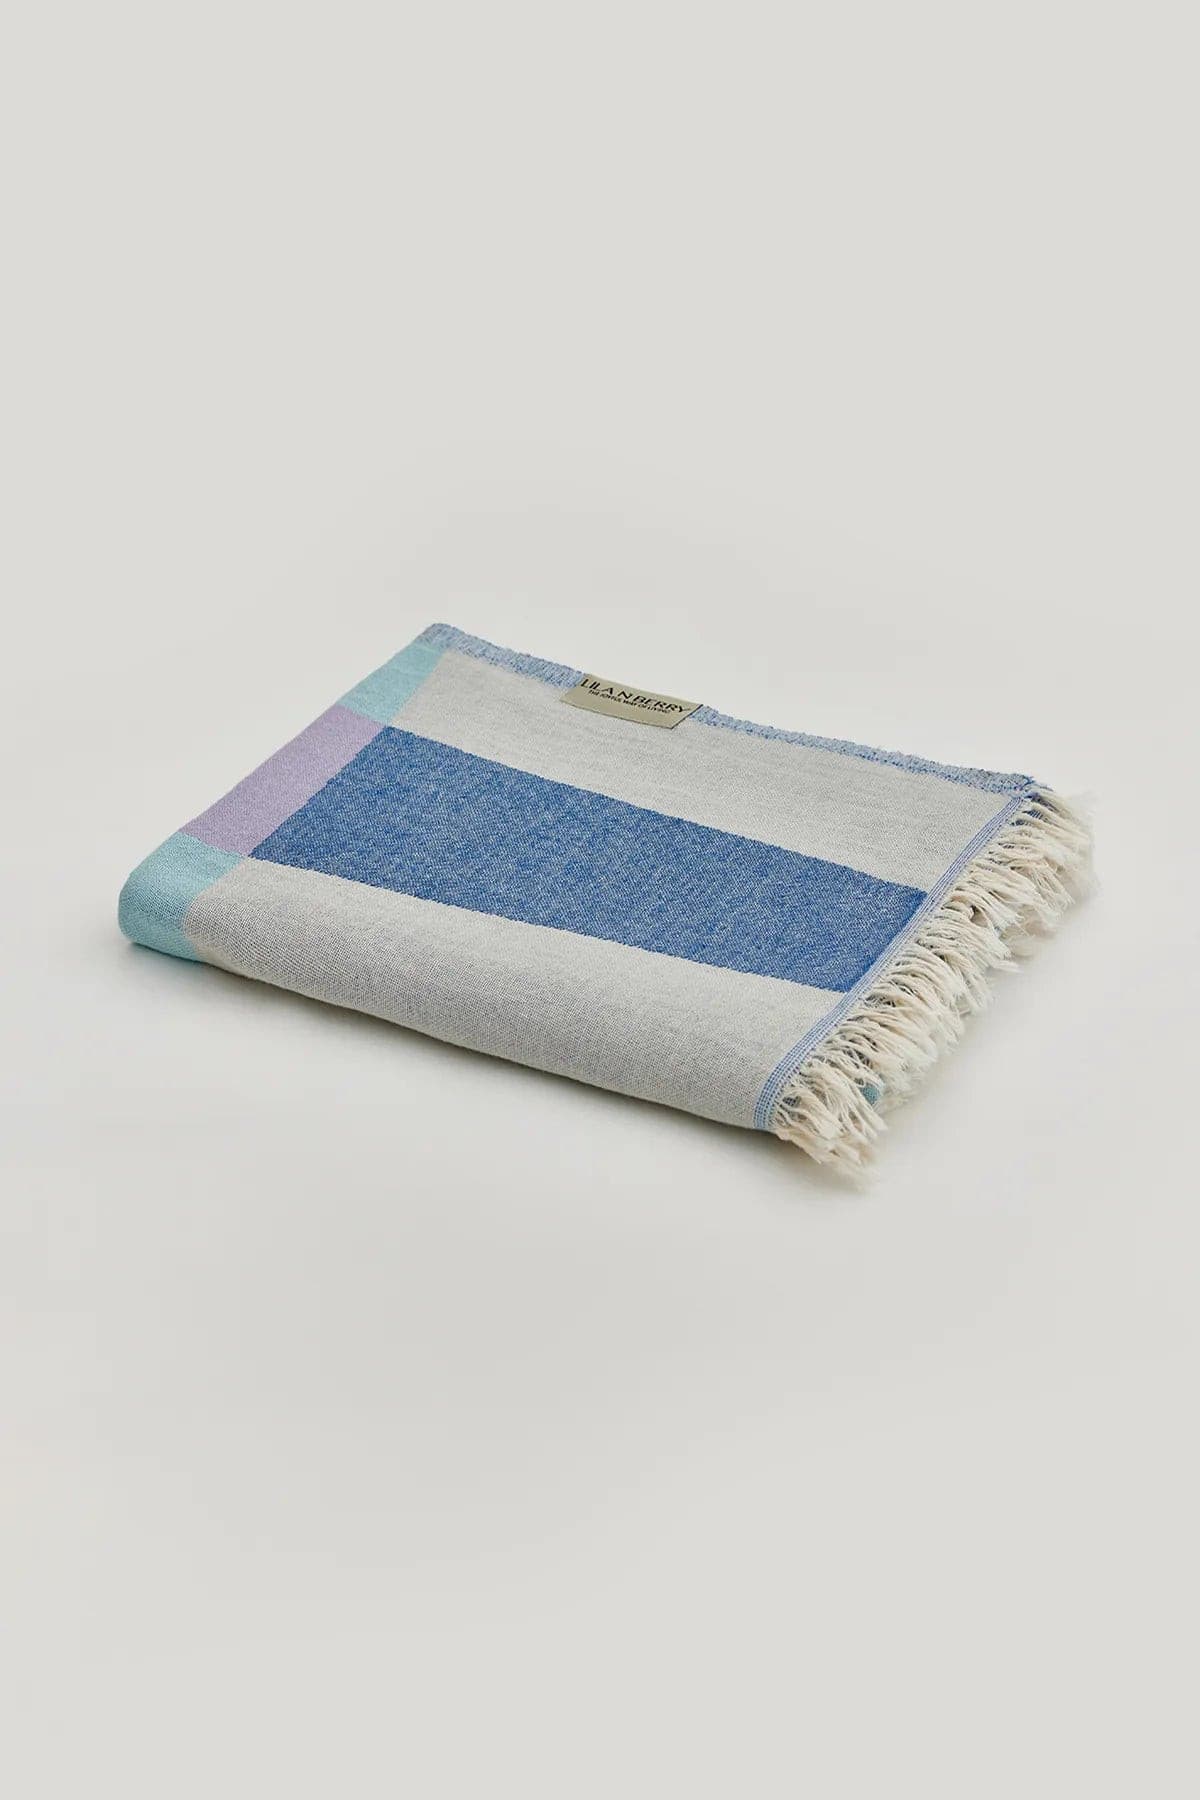 Beach/Bath,living place,Mellow Indigo,Turkish towel, folded,summer,line patterned,double-faces,purified sand,light,compact, easy pack,fun, recycled,multi color